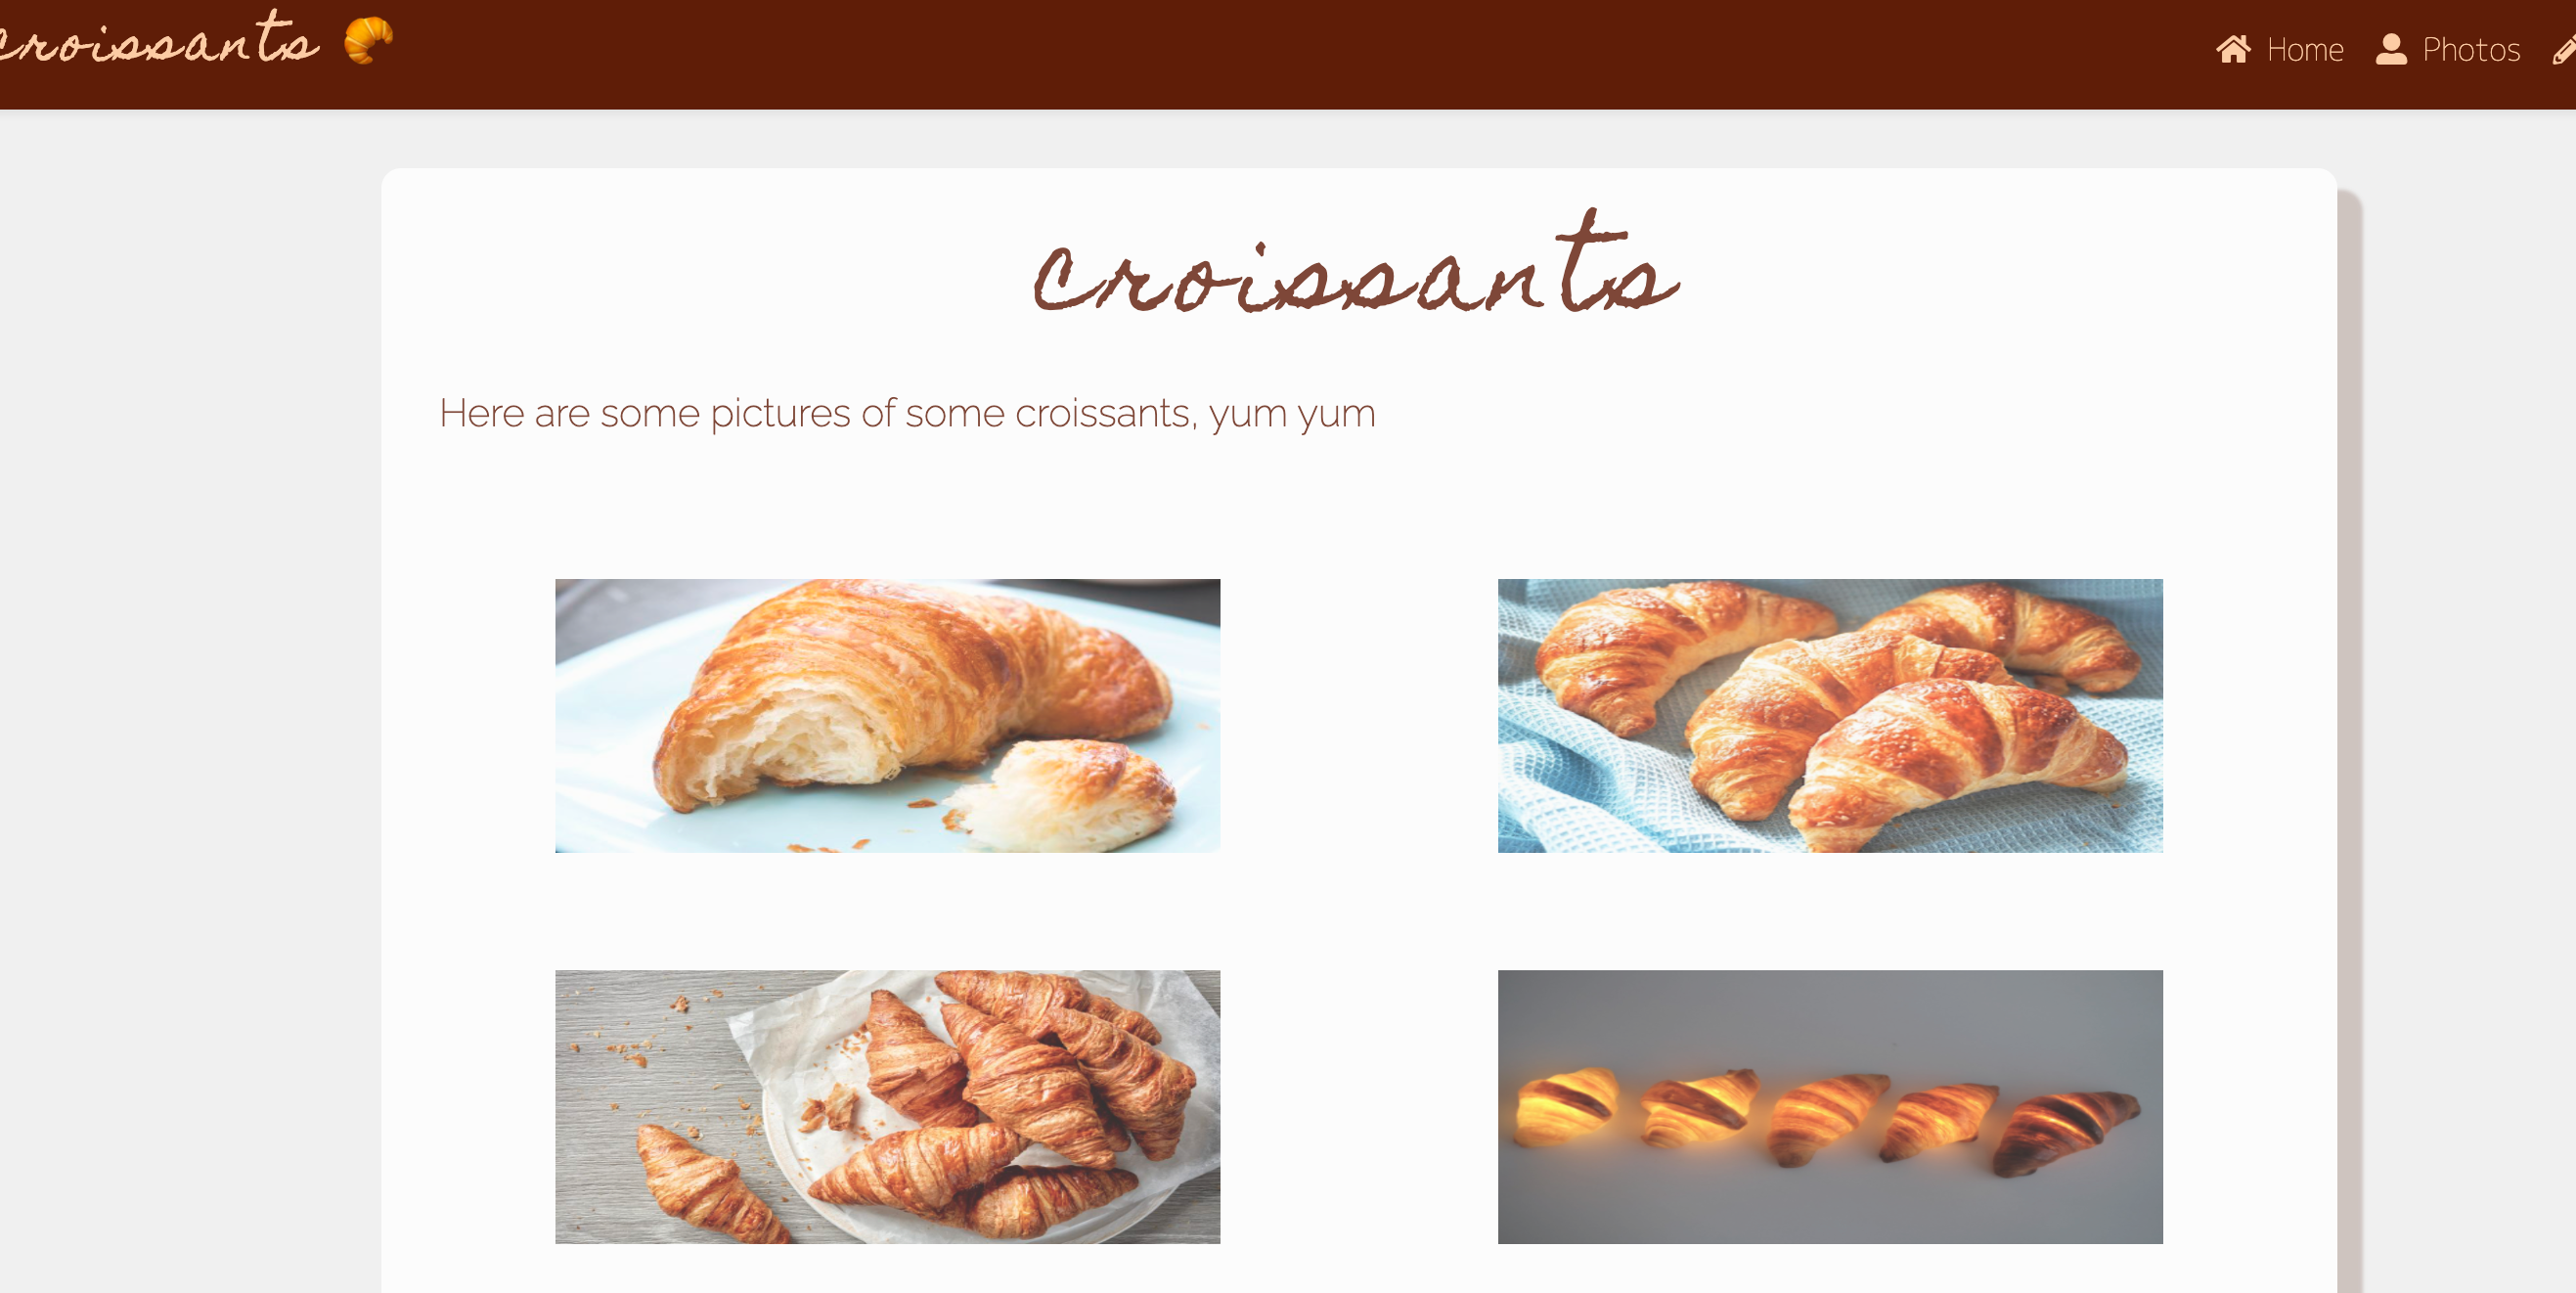 A page dedicated to croissants